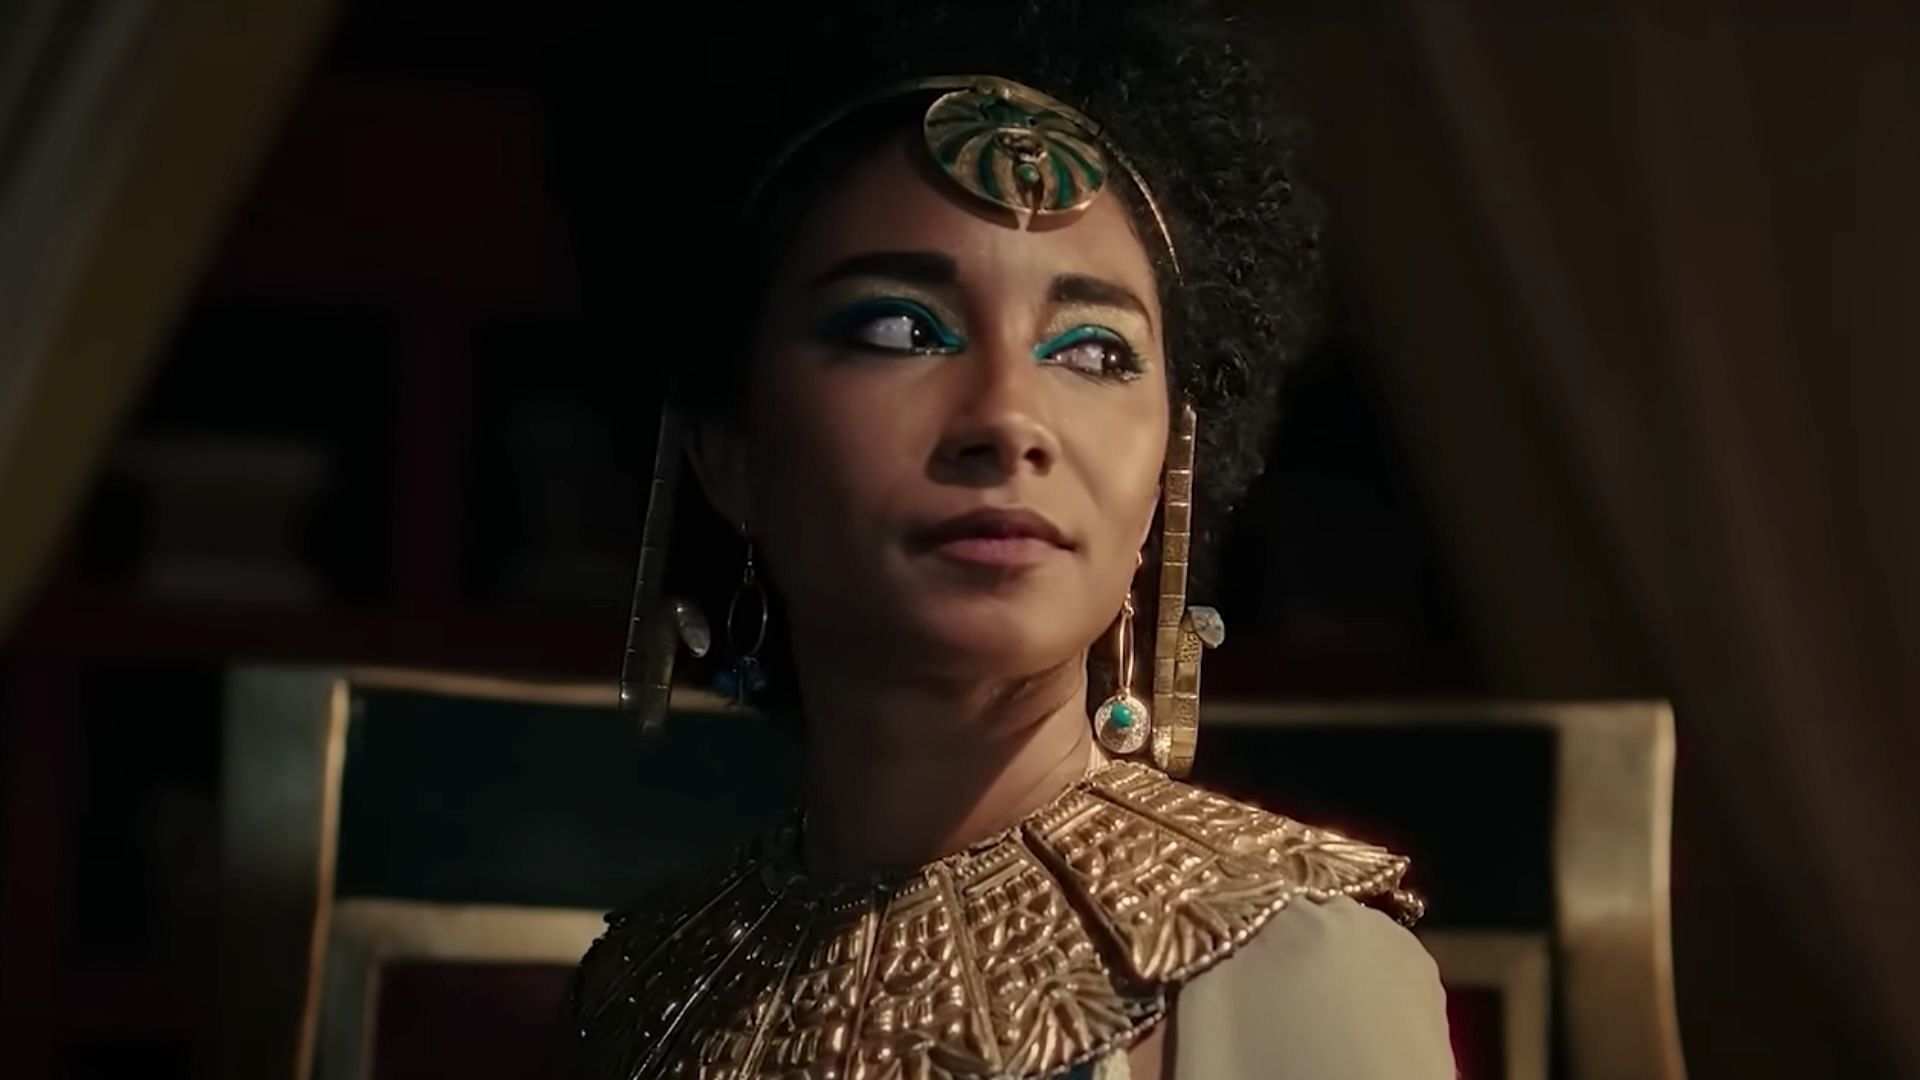 Queen Cleopatra as seen in the second season of the African Queens documentary-drama series (Image via Netflix)